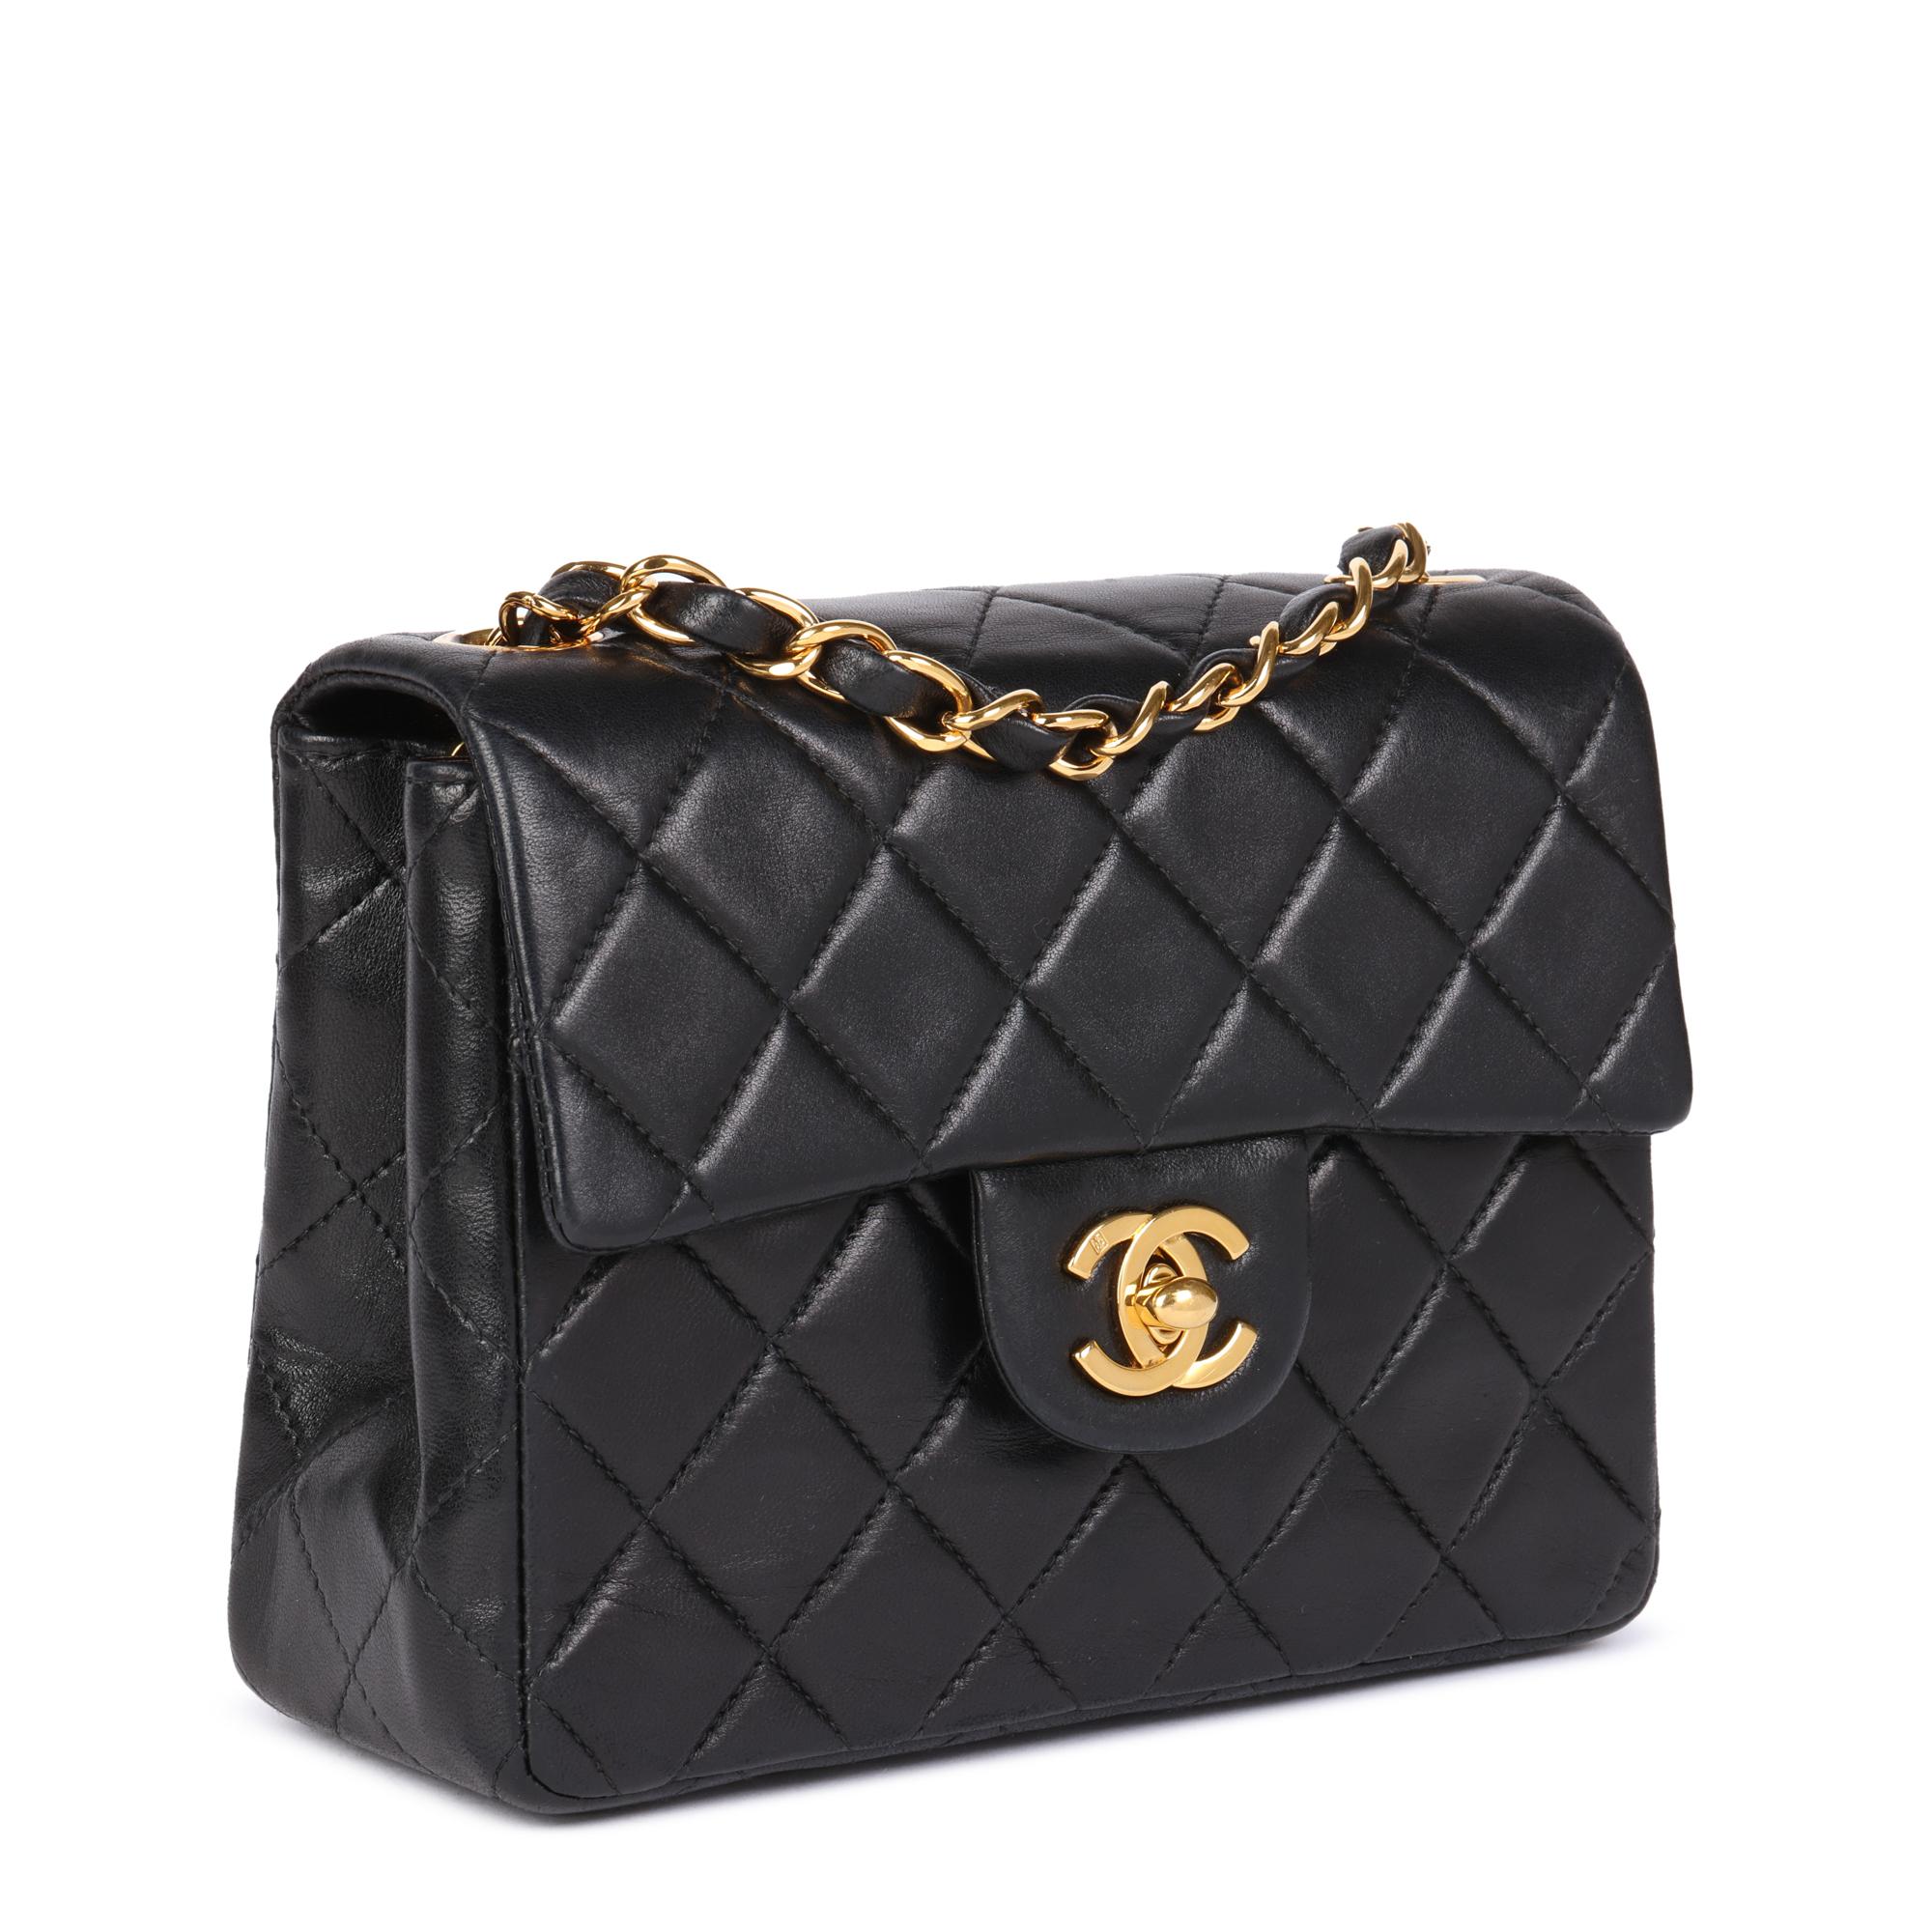 CHANEL
Black Quilted Lambskin Vintage Square Mini Flap Bag

Serial Number: 6298390
Age (Circa): 2000
Accompanied By: Chanel Dust Bag, Authenticity Card 
Authenticity Details: Authenticity Card, Serial Sticker (Made in France)
Gender: Ladies
Type: